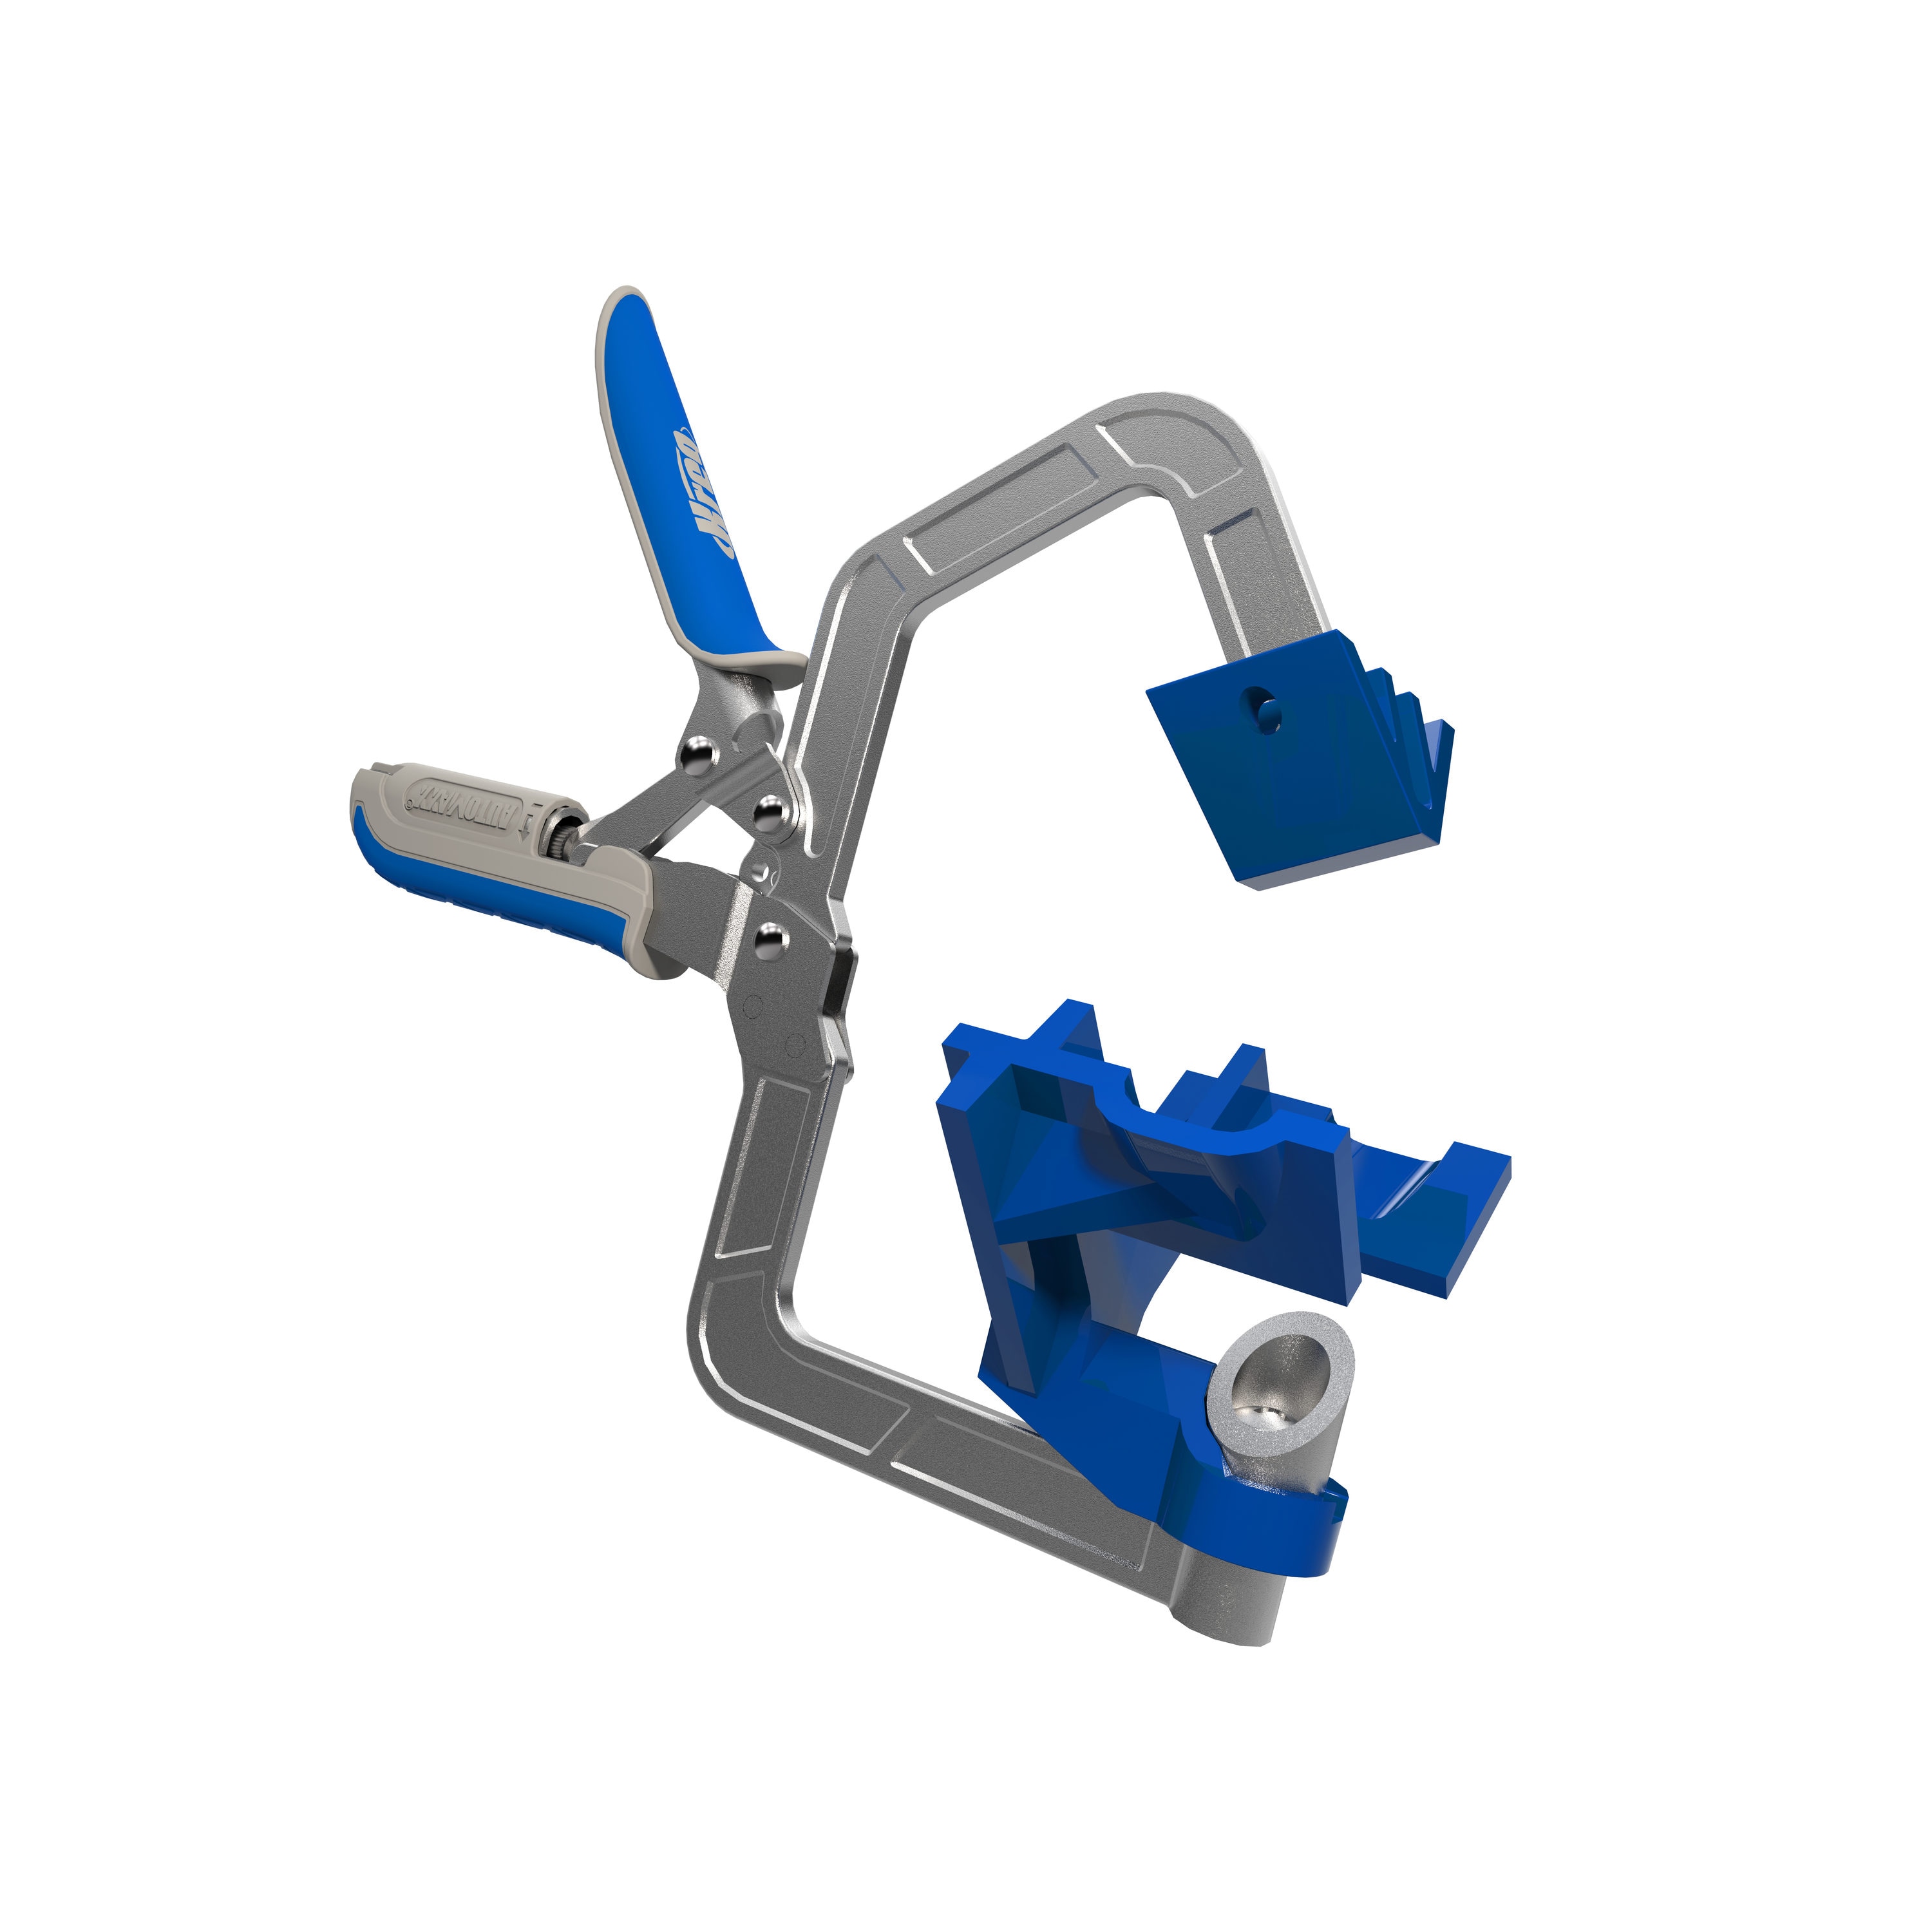 Kreg Steel Corner Clamp with 350 lbs. Clamping Force, 3-in Throat Depth,  1-in Maximum Jaw Opening, Silver Finish